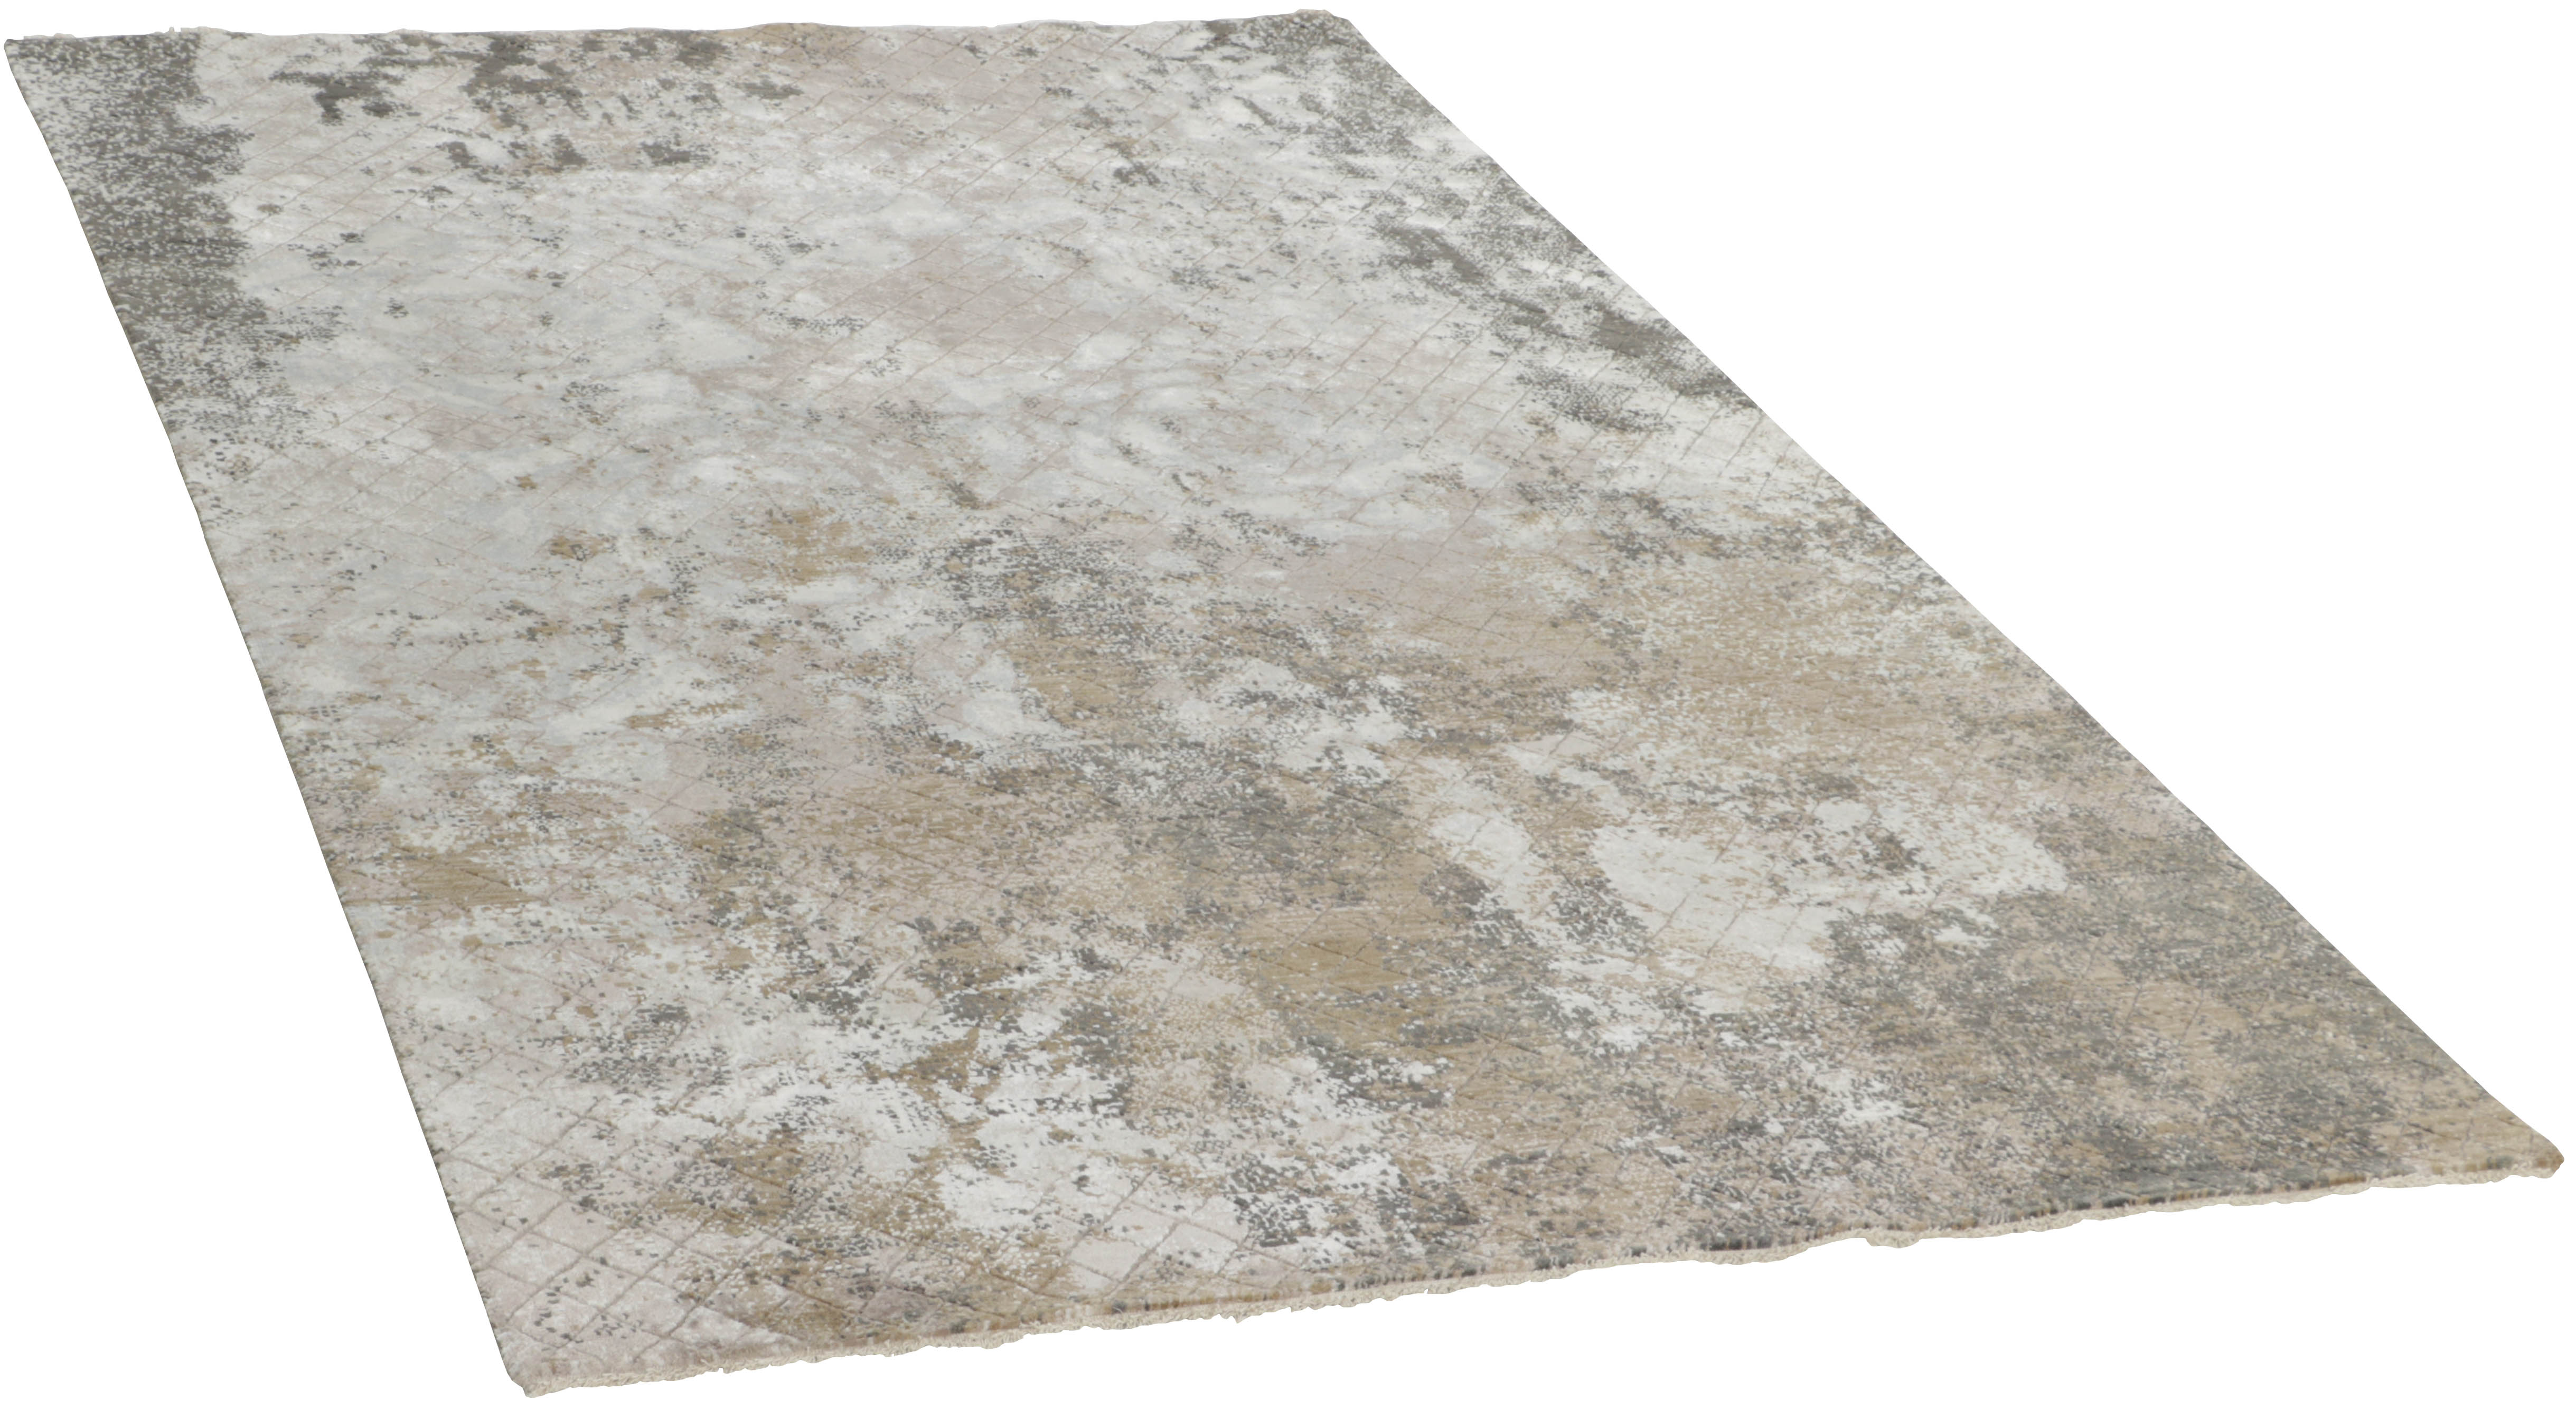 Large area rug with abstract floral design in grey and beige